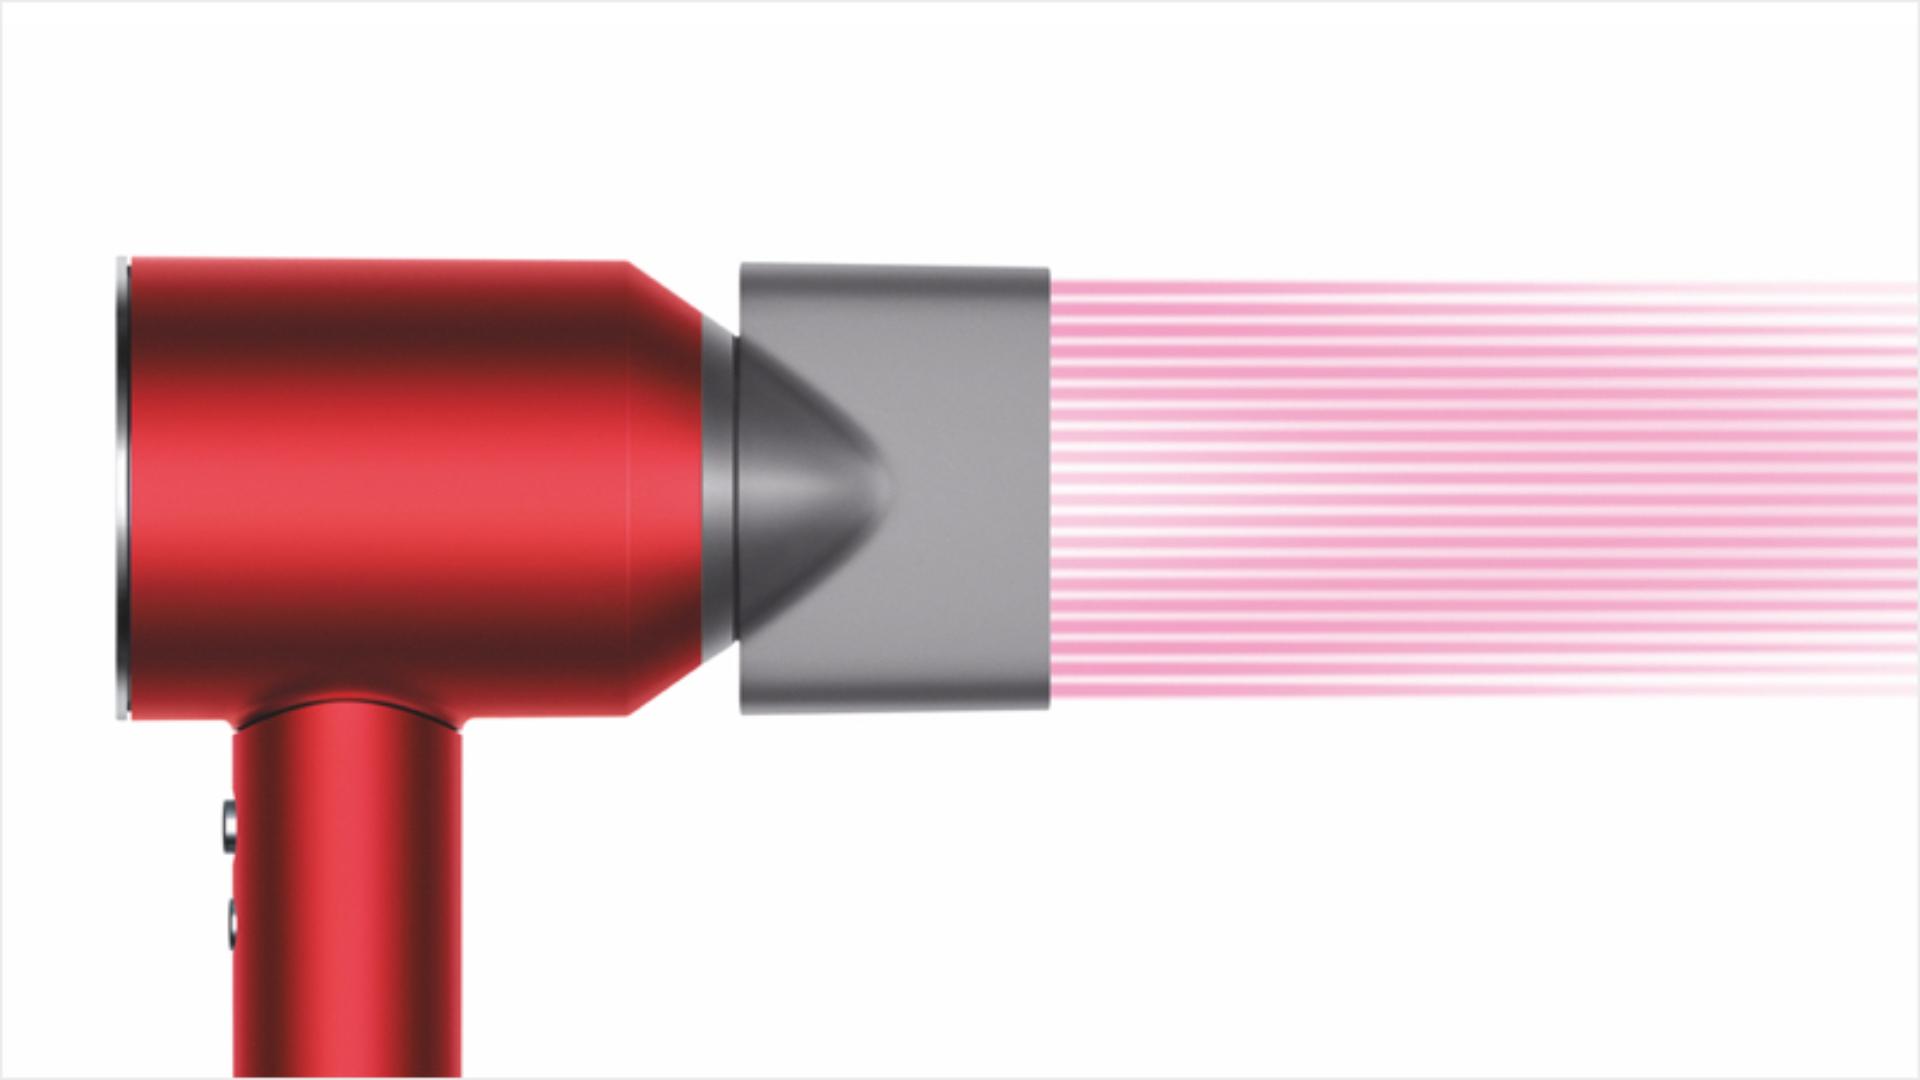 Dyson Supersonic™ hair dryer with Smoothing nozzle attachment